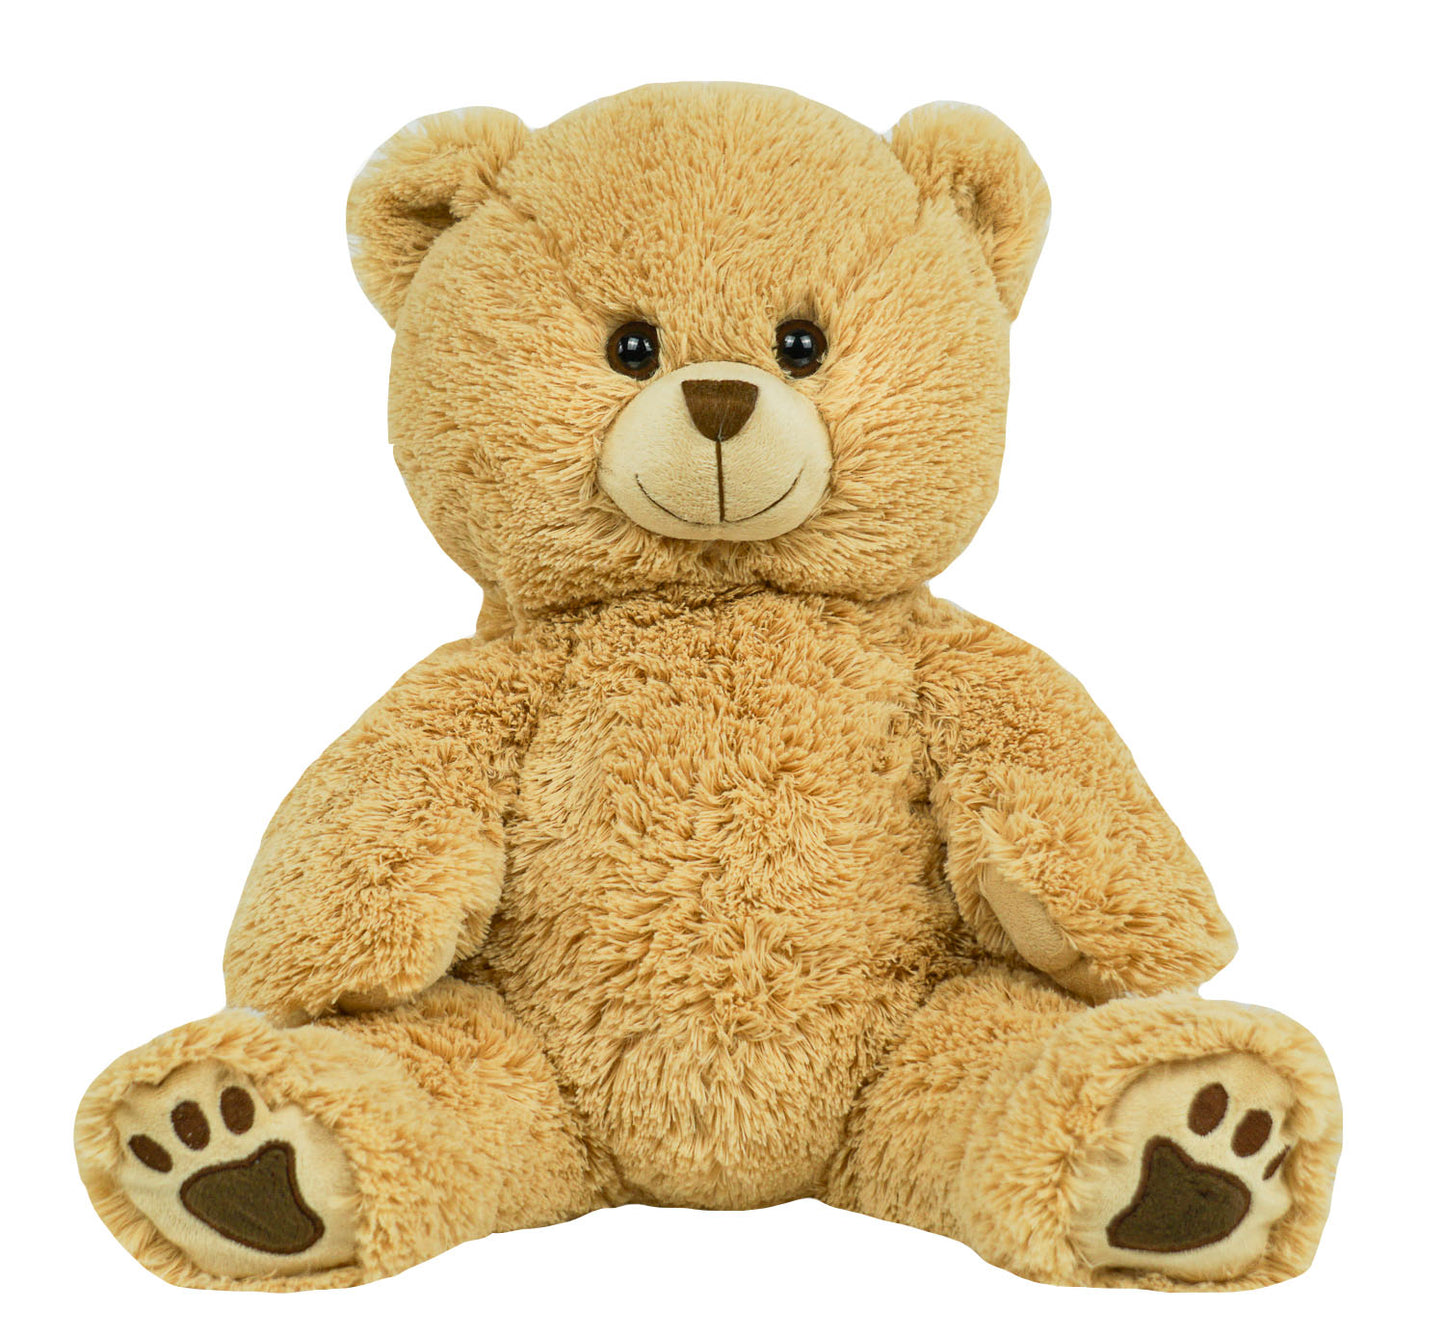 Baby Bump Gift - Recordable Teddy Bear for best wishes or Ultrasound heartbeat